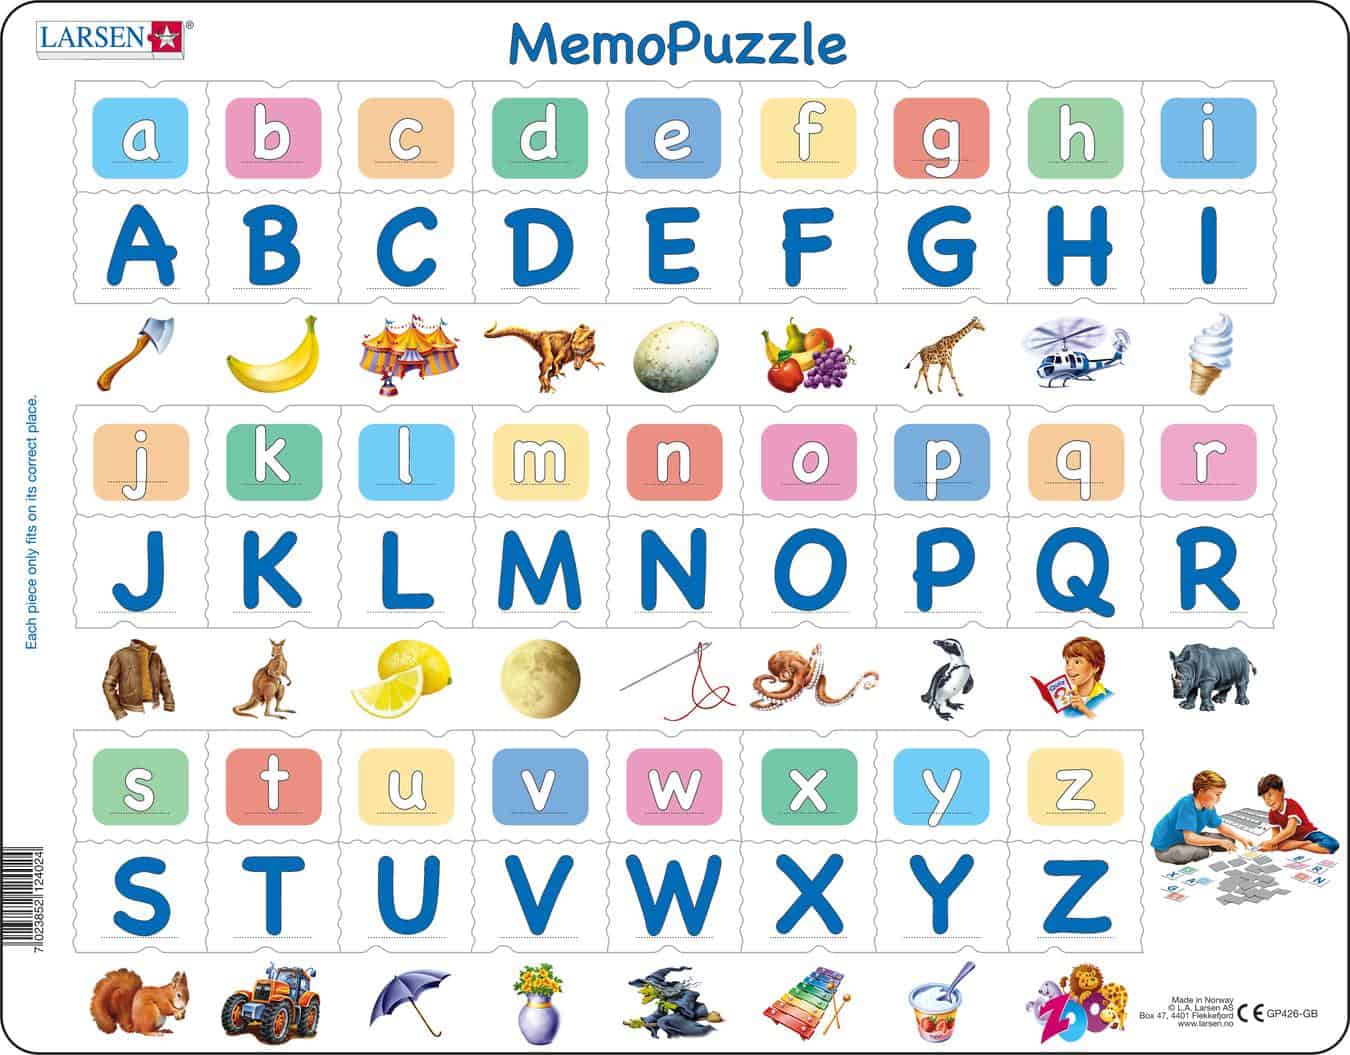 maxi-puzzle-alphabet-26-upper-and-lower-case-letters-english-larsen